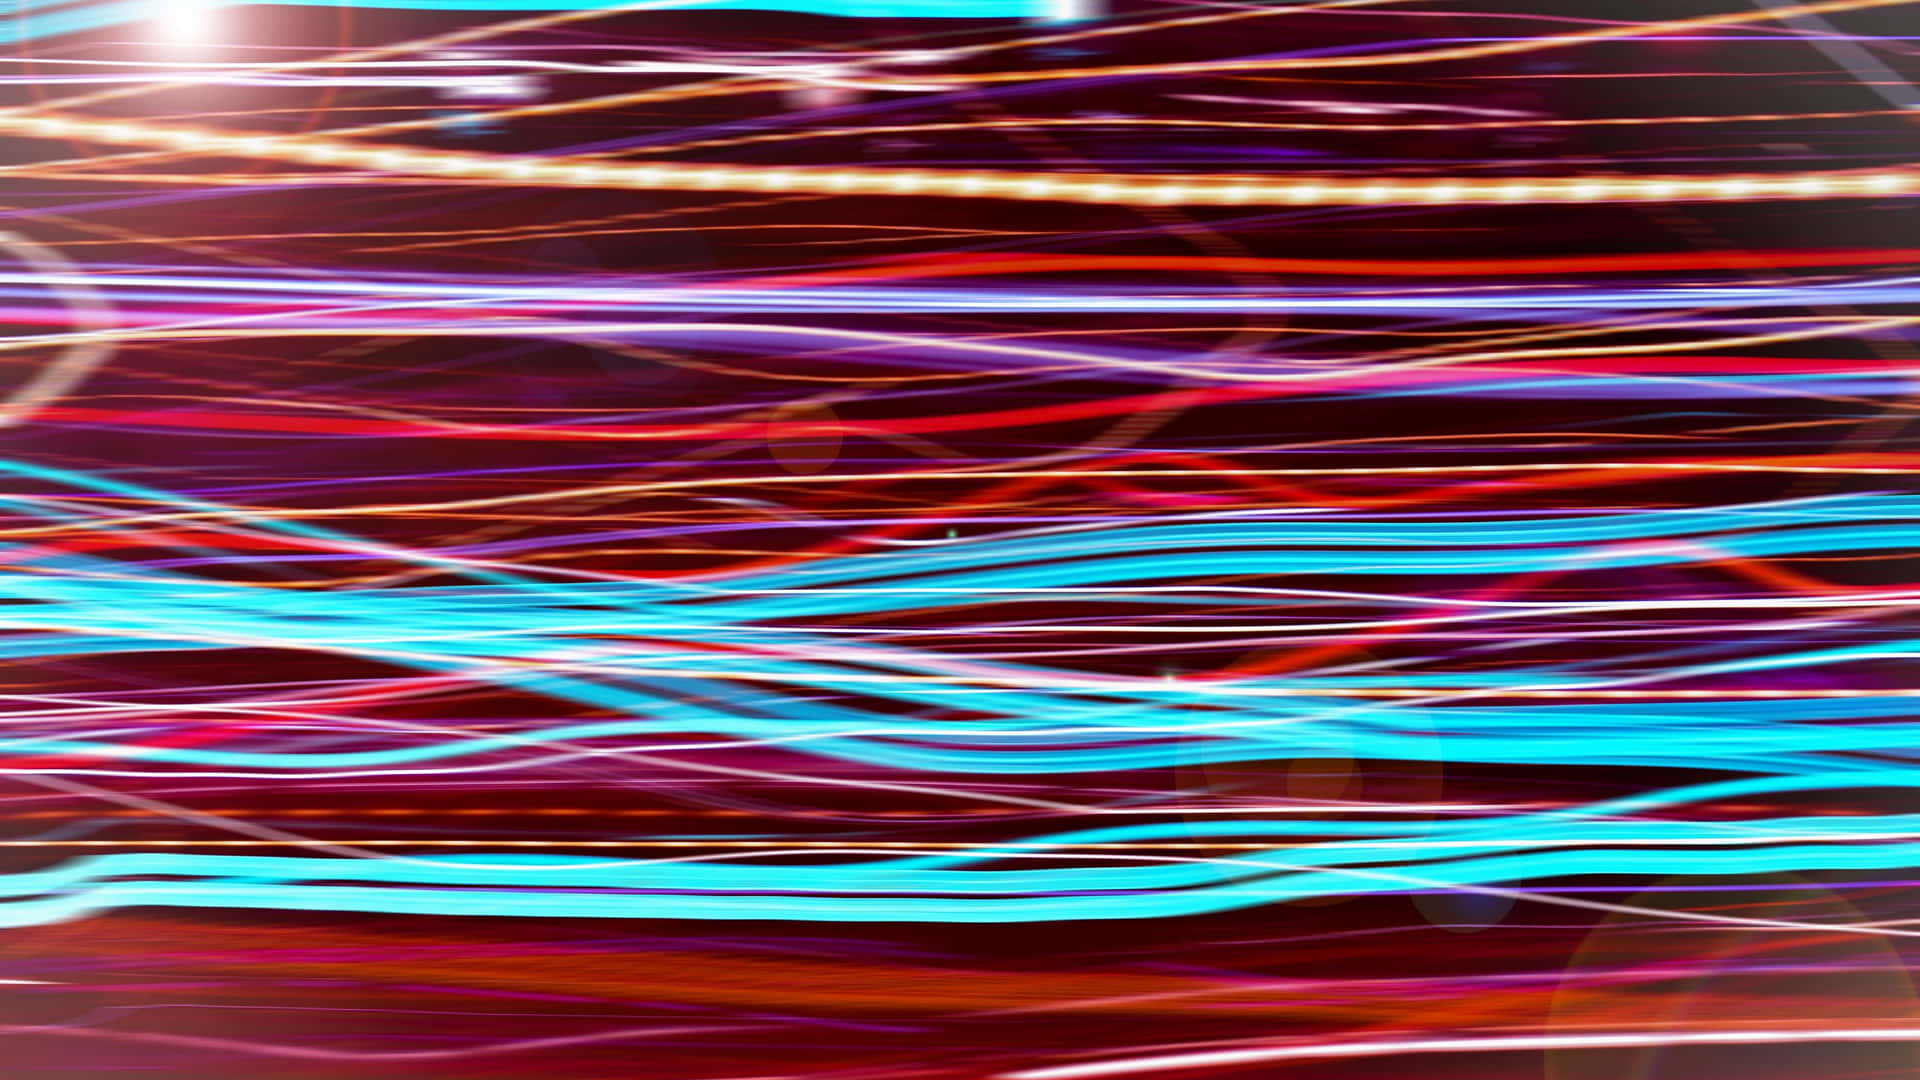 Horizontal Neon Abstract Lights Picture